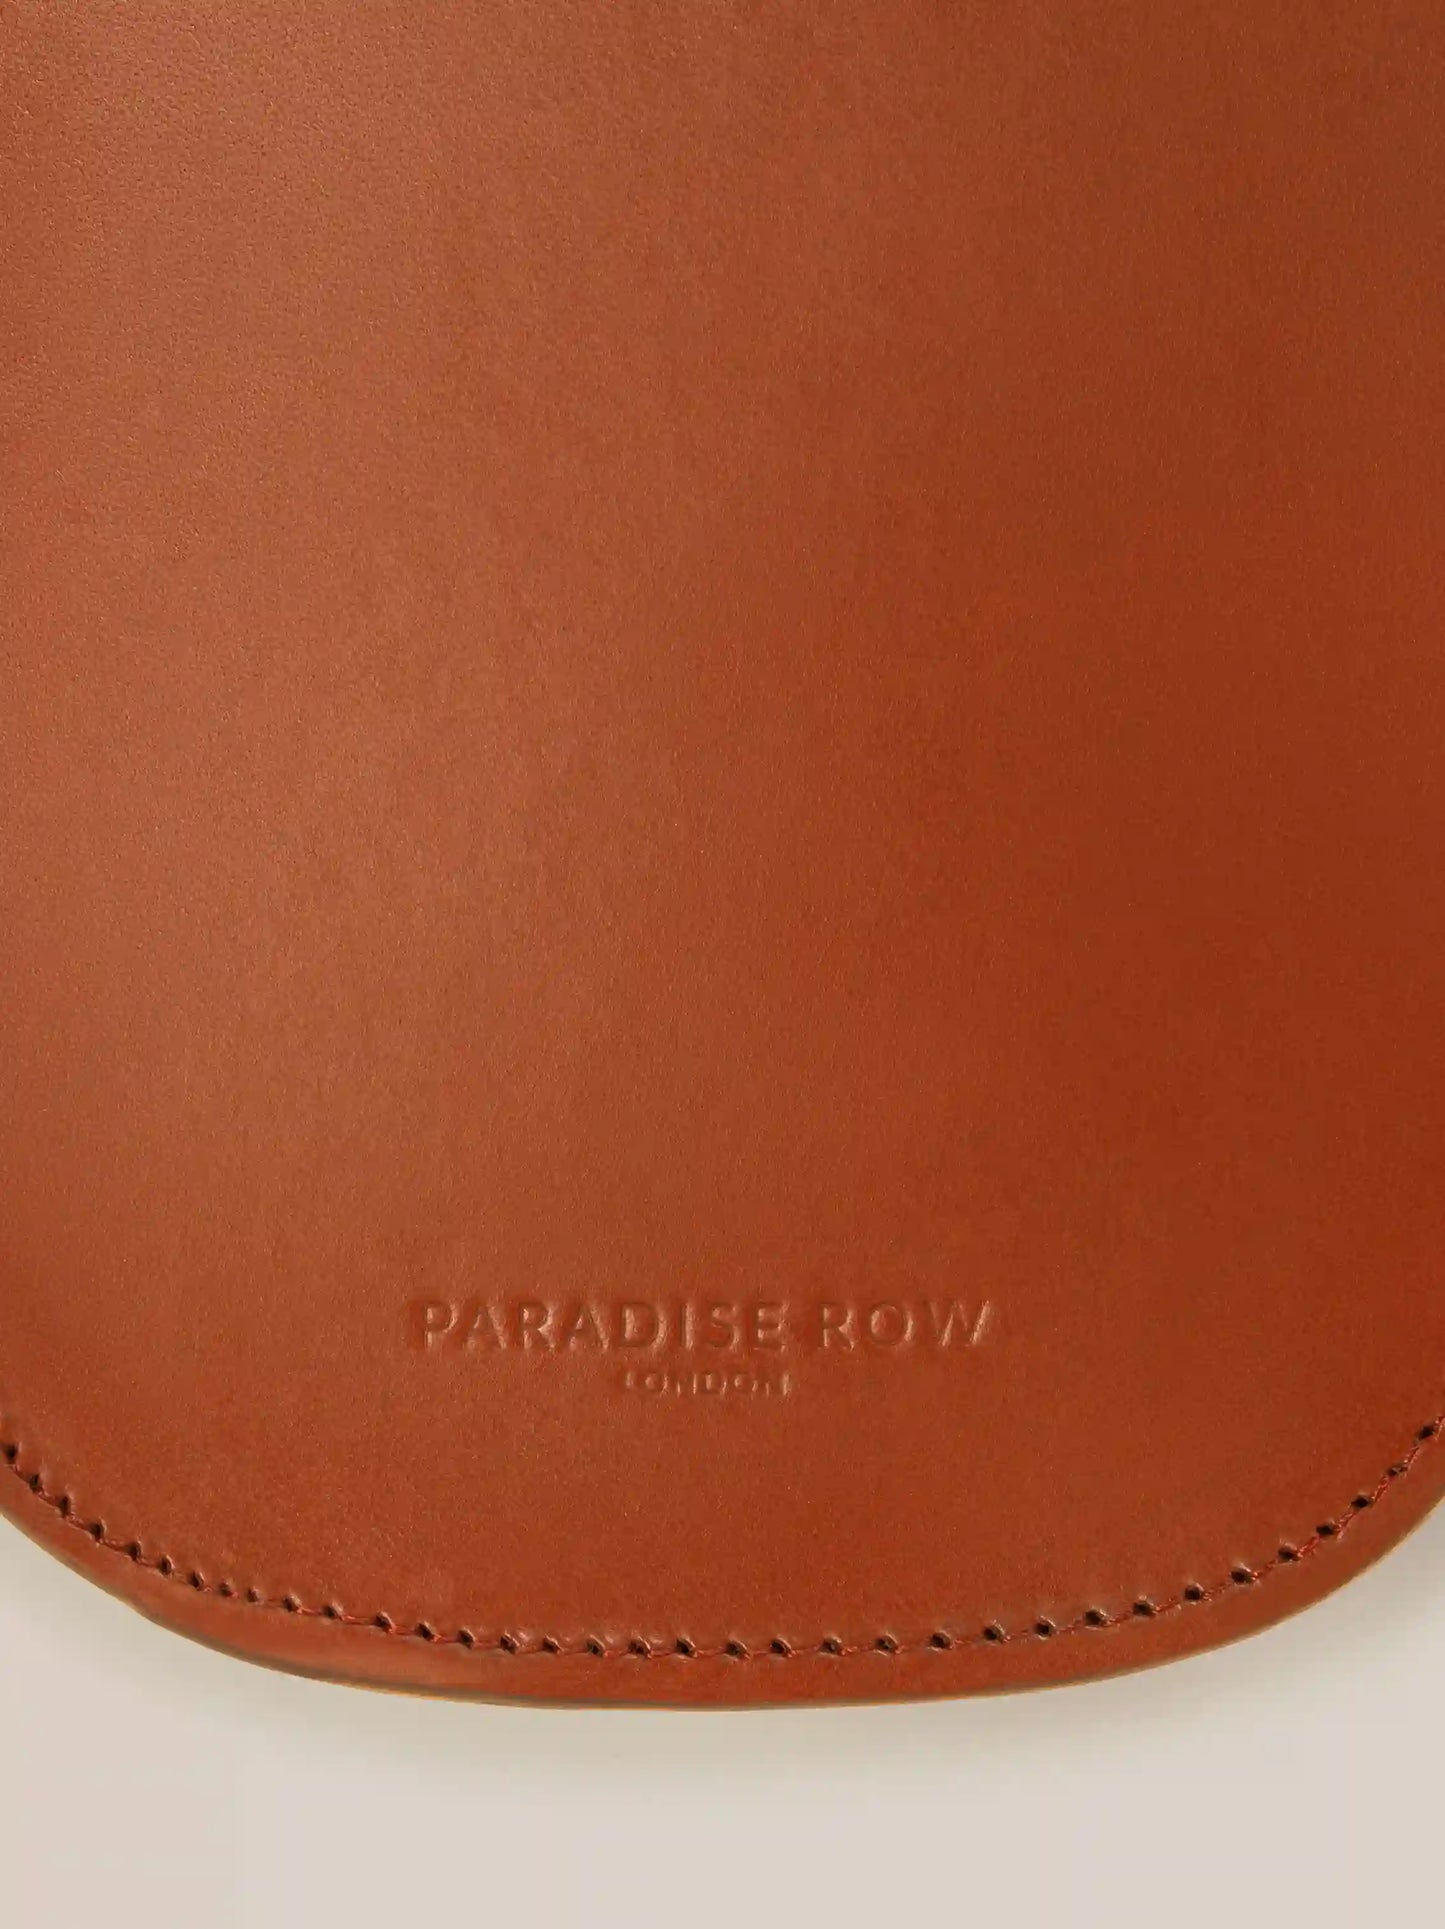 Tan Leather Tennis Racket Cover